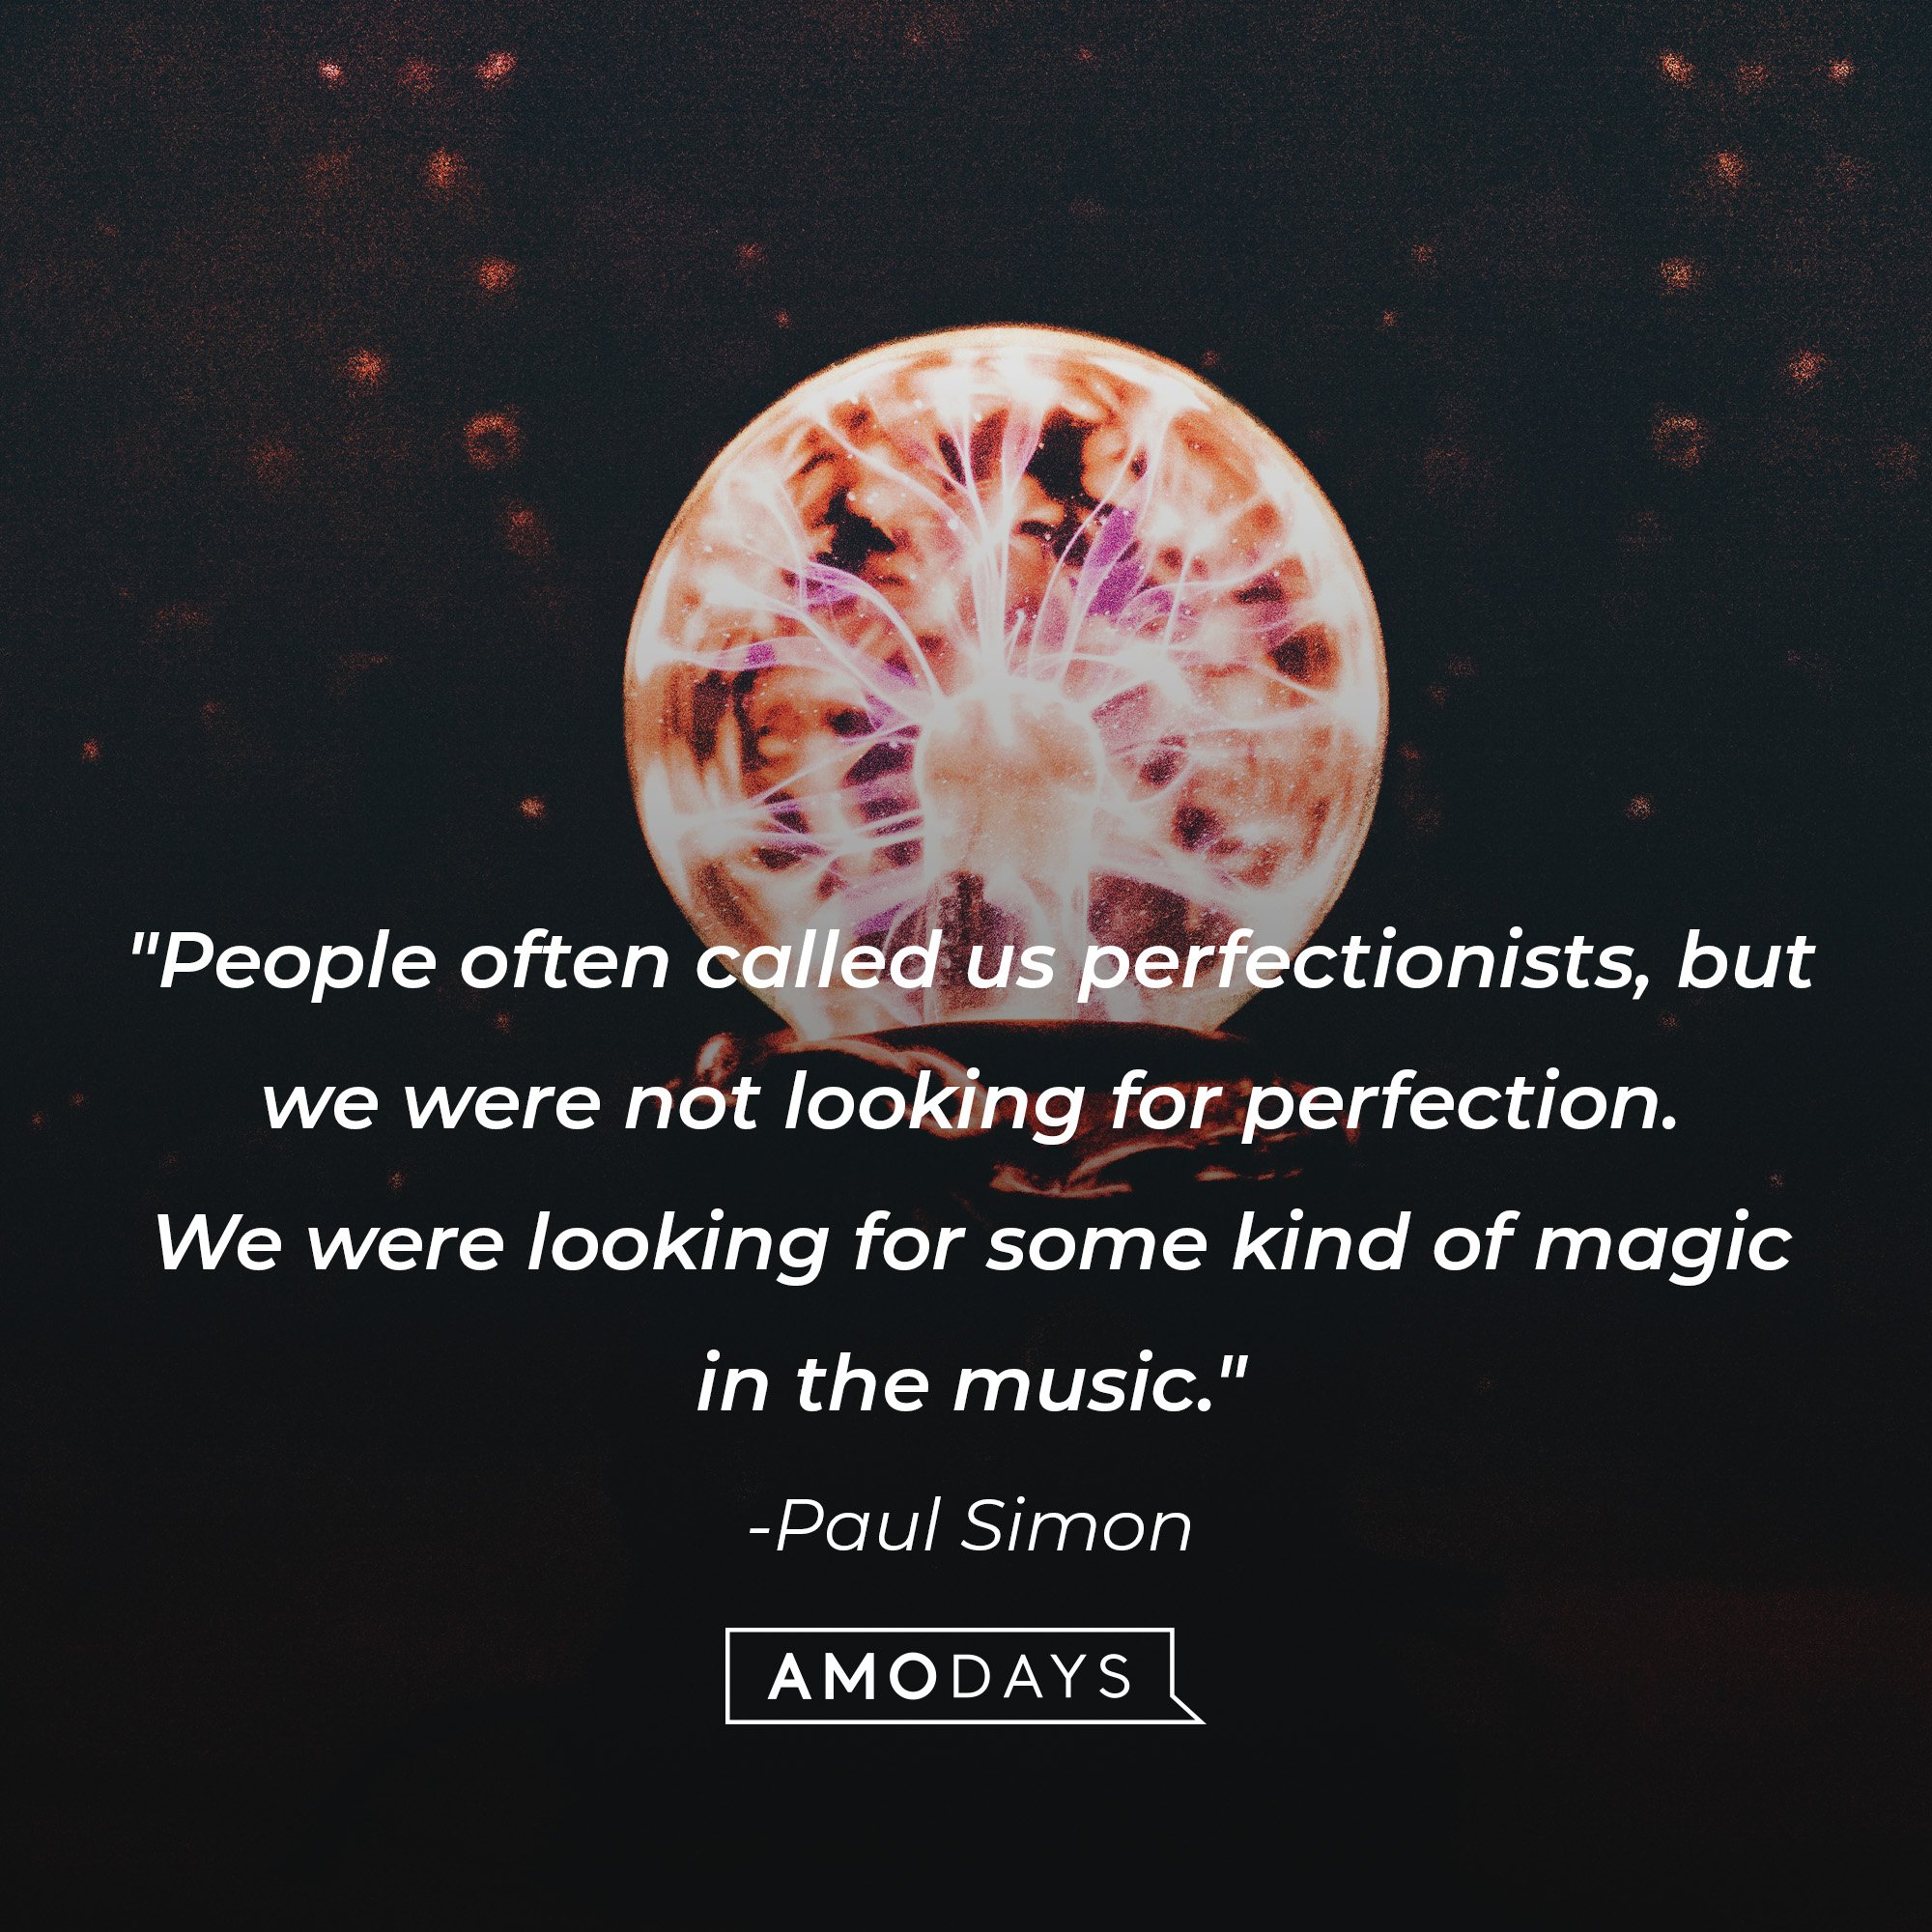 Paul Simon’s quote: "People often called us perfectionists, but we were not looking for perfection. We were looking for some kind of magic in the music." | Image: AmoDays